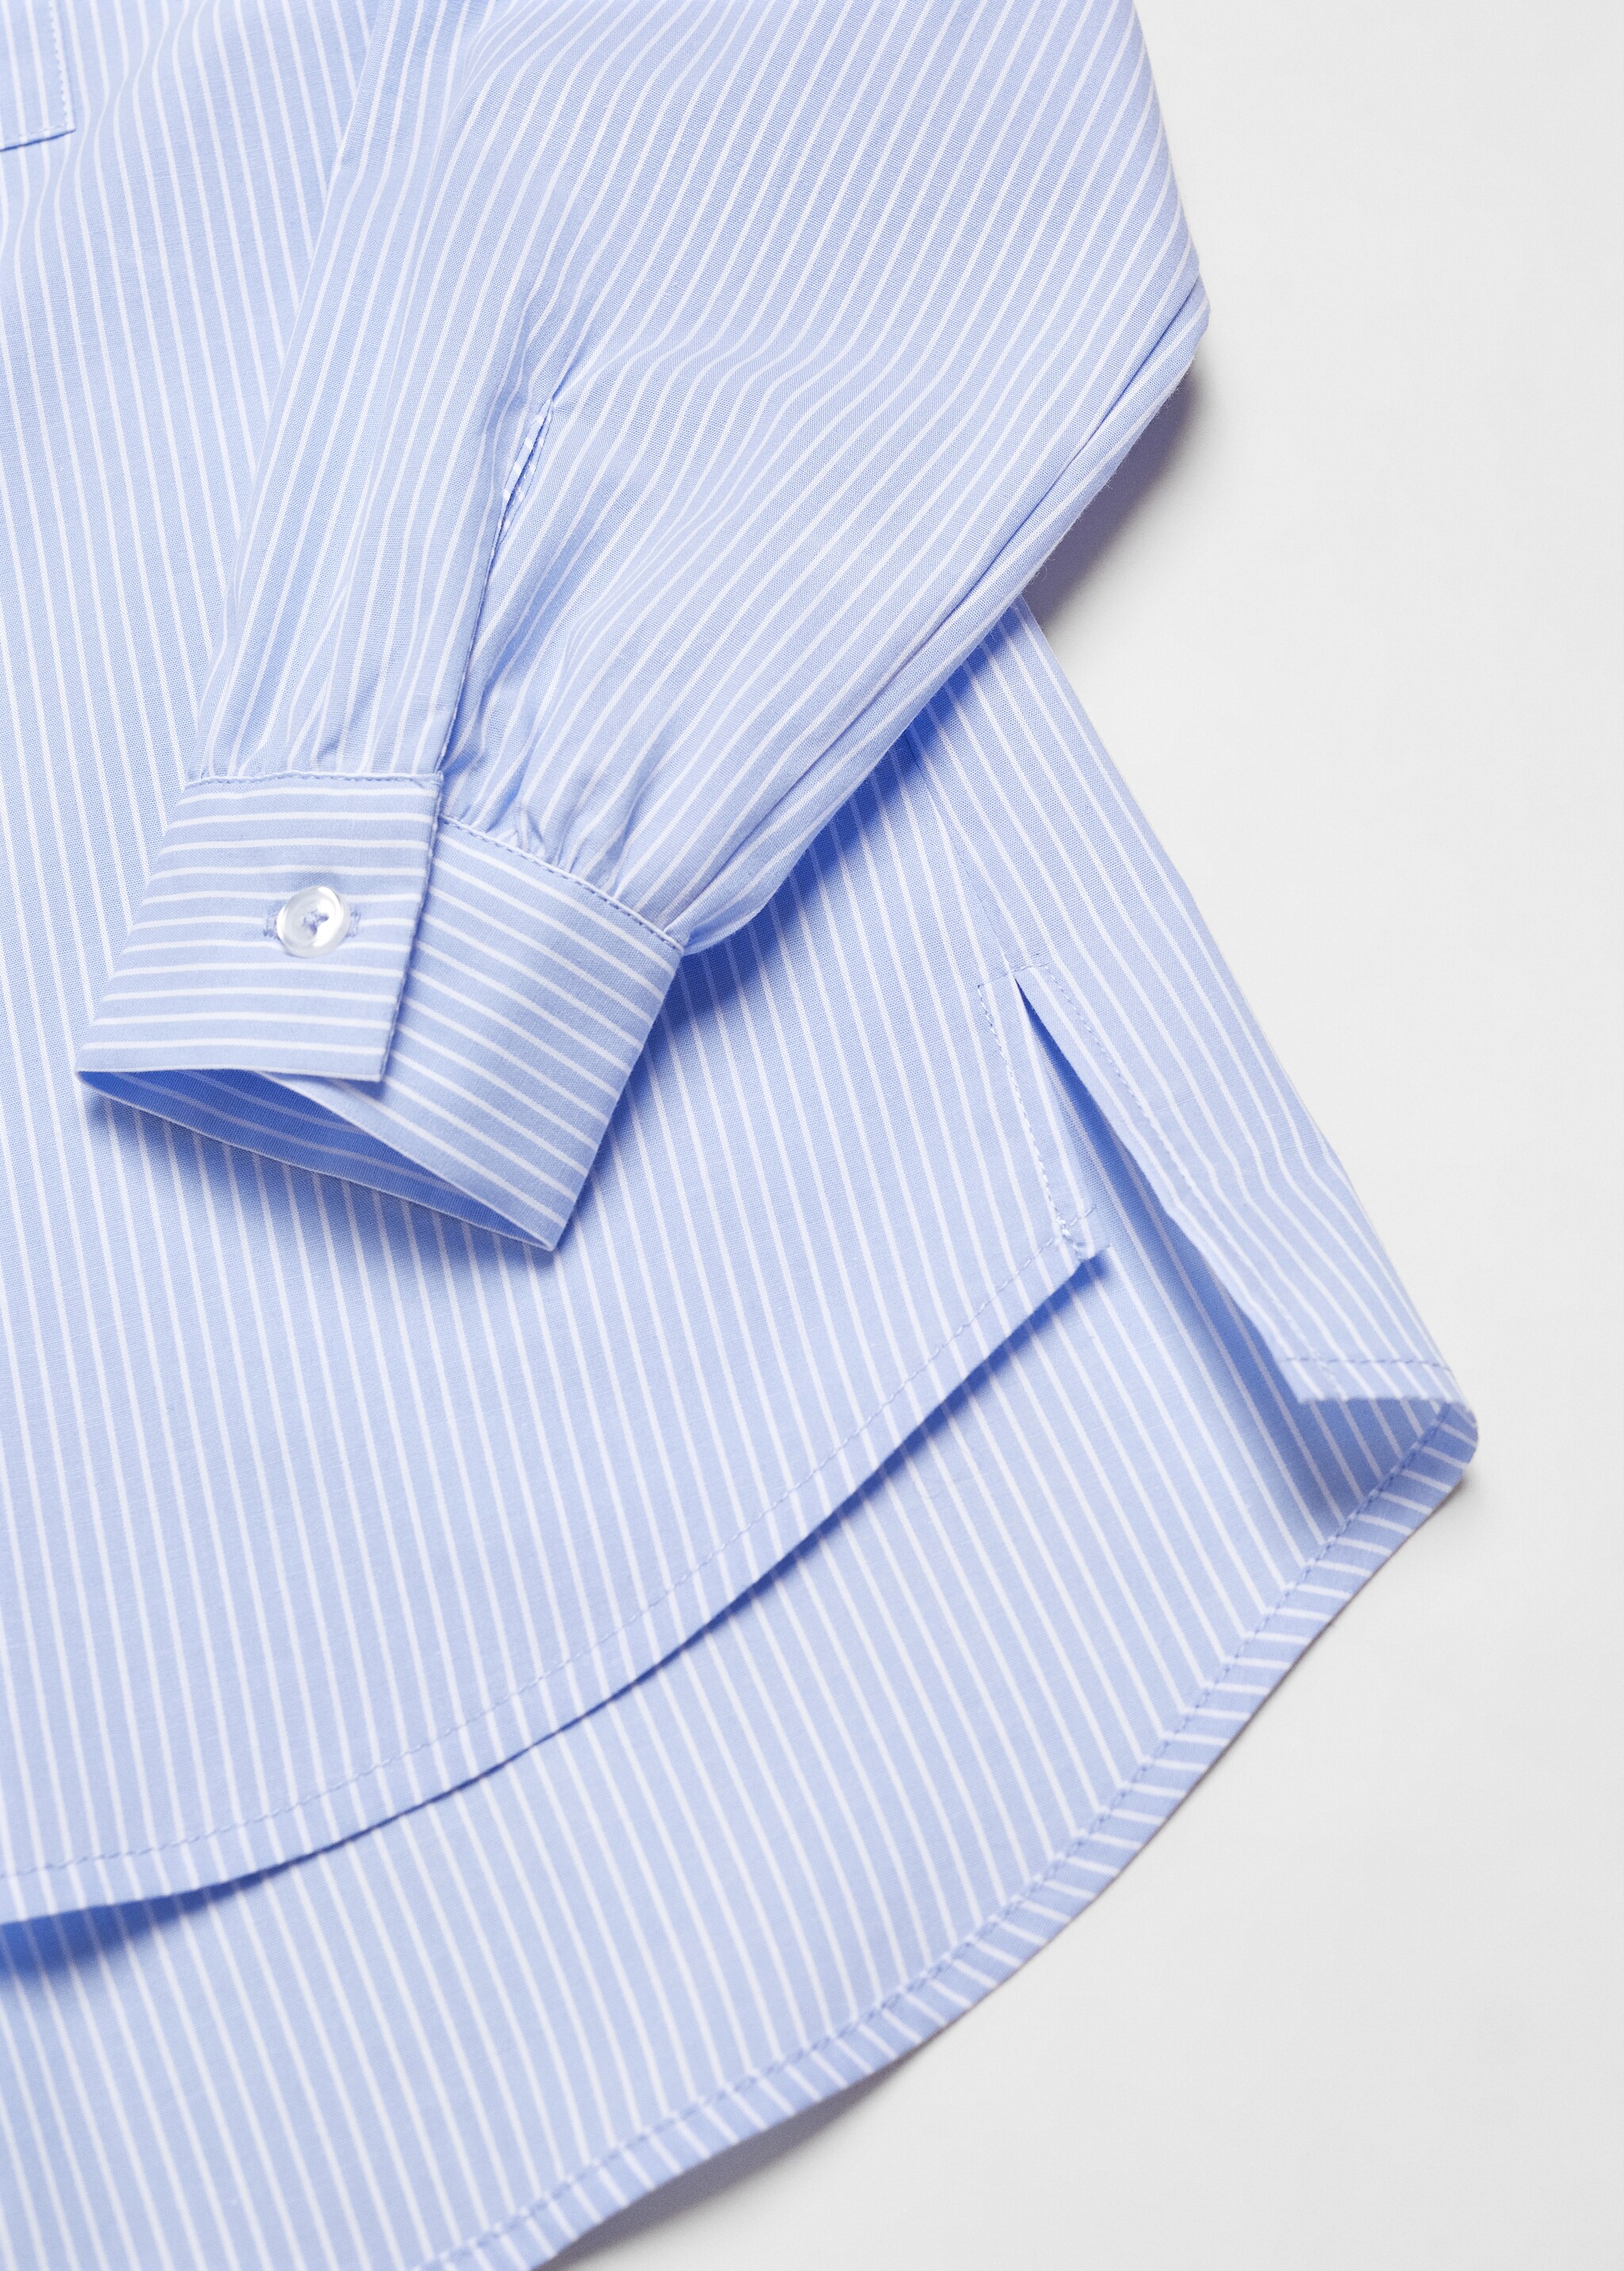 Oversize striped shirt - Details of the article 8